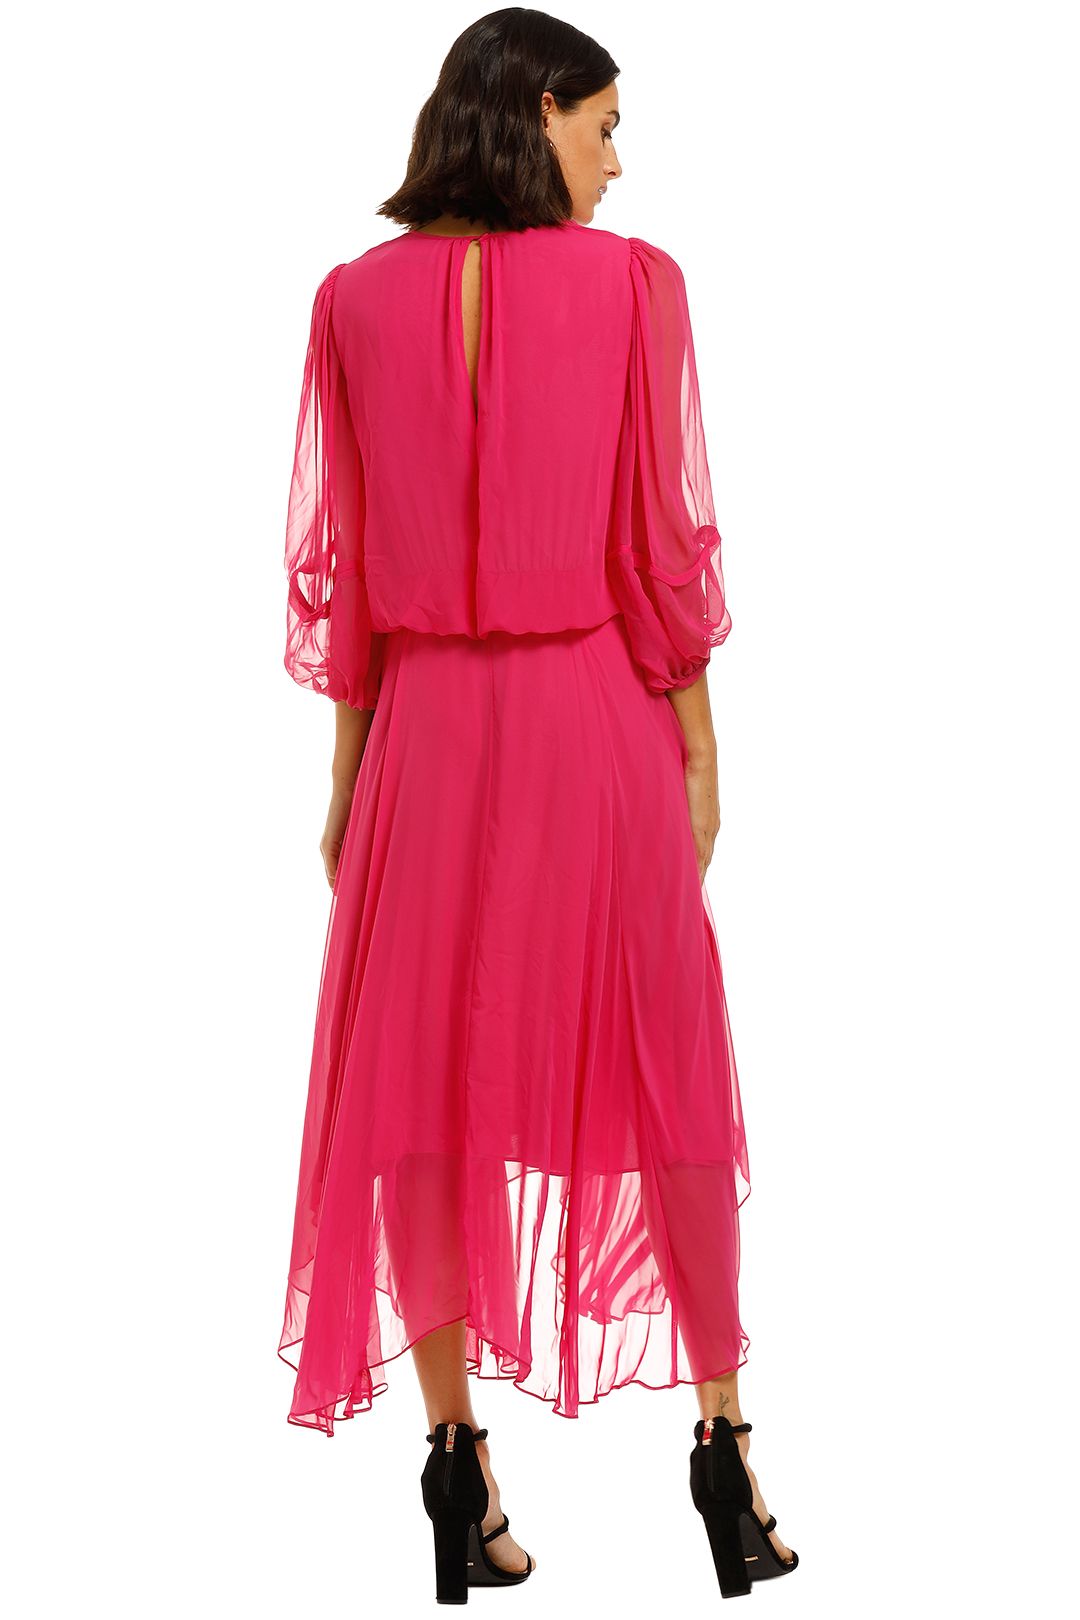 Camilla-and-Marc-Dylan-Dress-Pink-Back